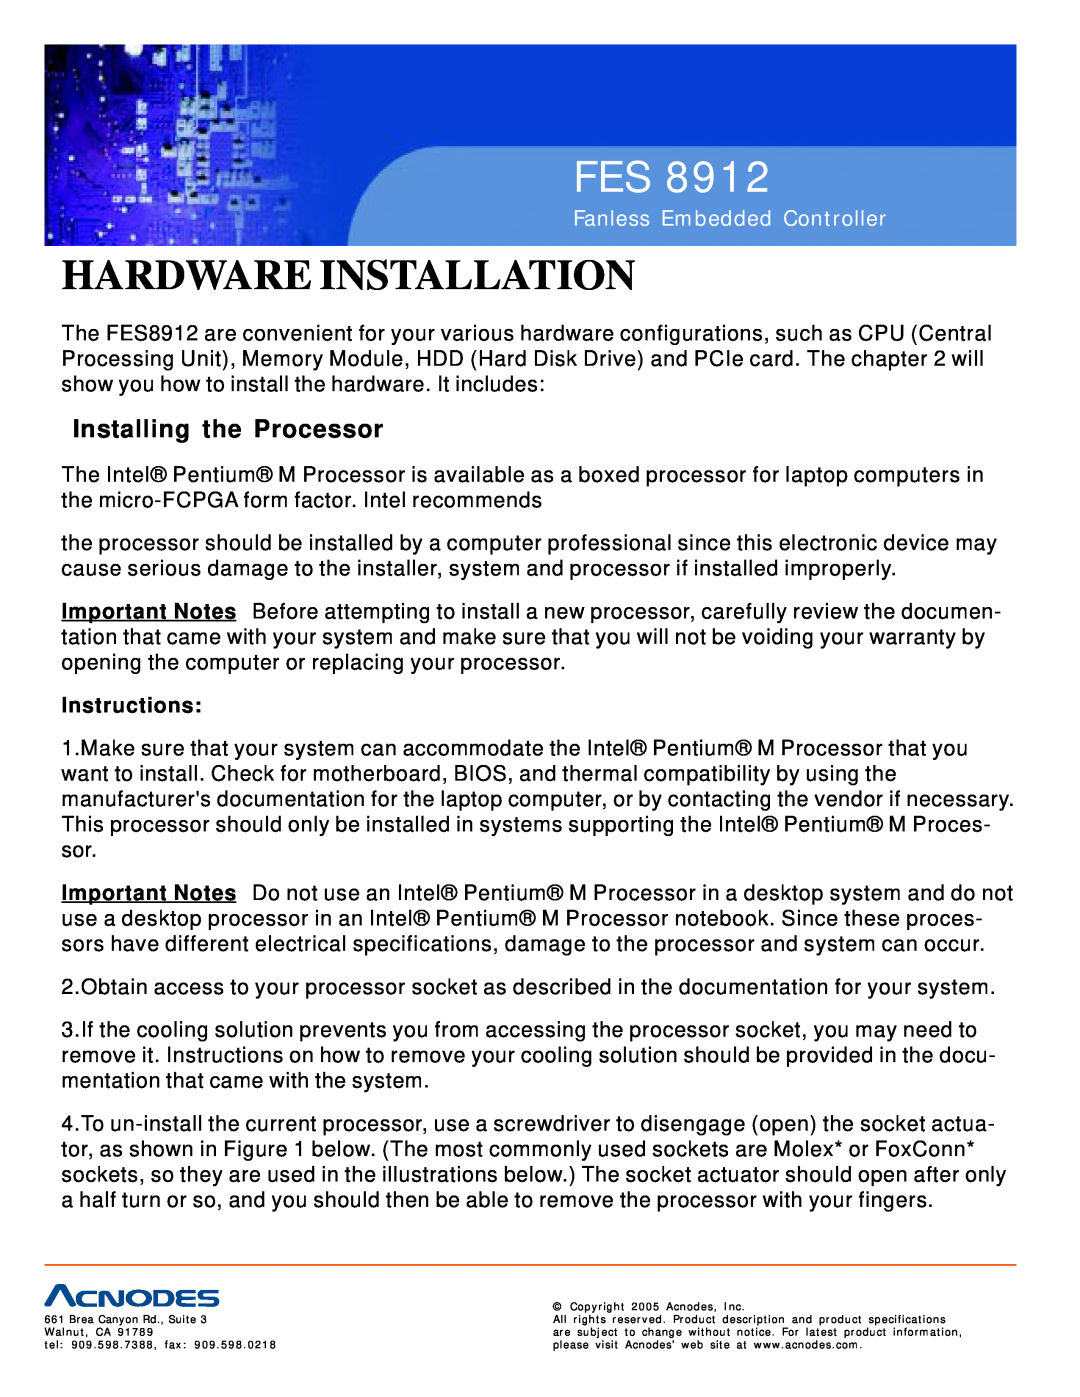 Acnodes FES 8912 specifications Installing the Processor, Hardware Installation, Fanless Embedded Controller, Instructions 